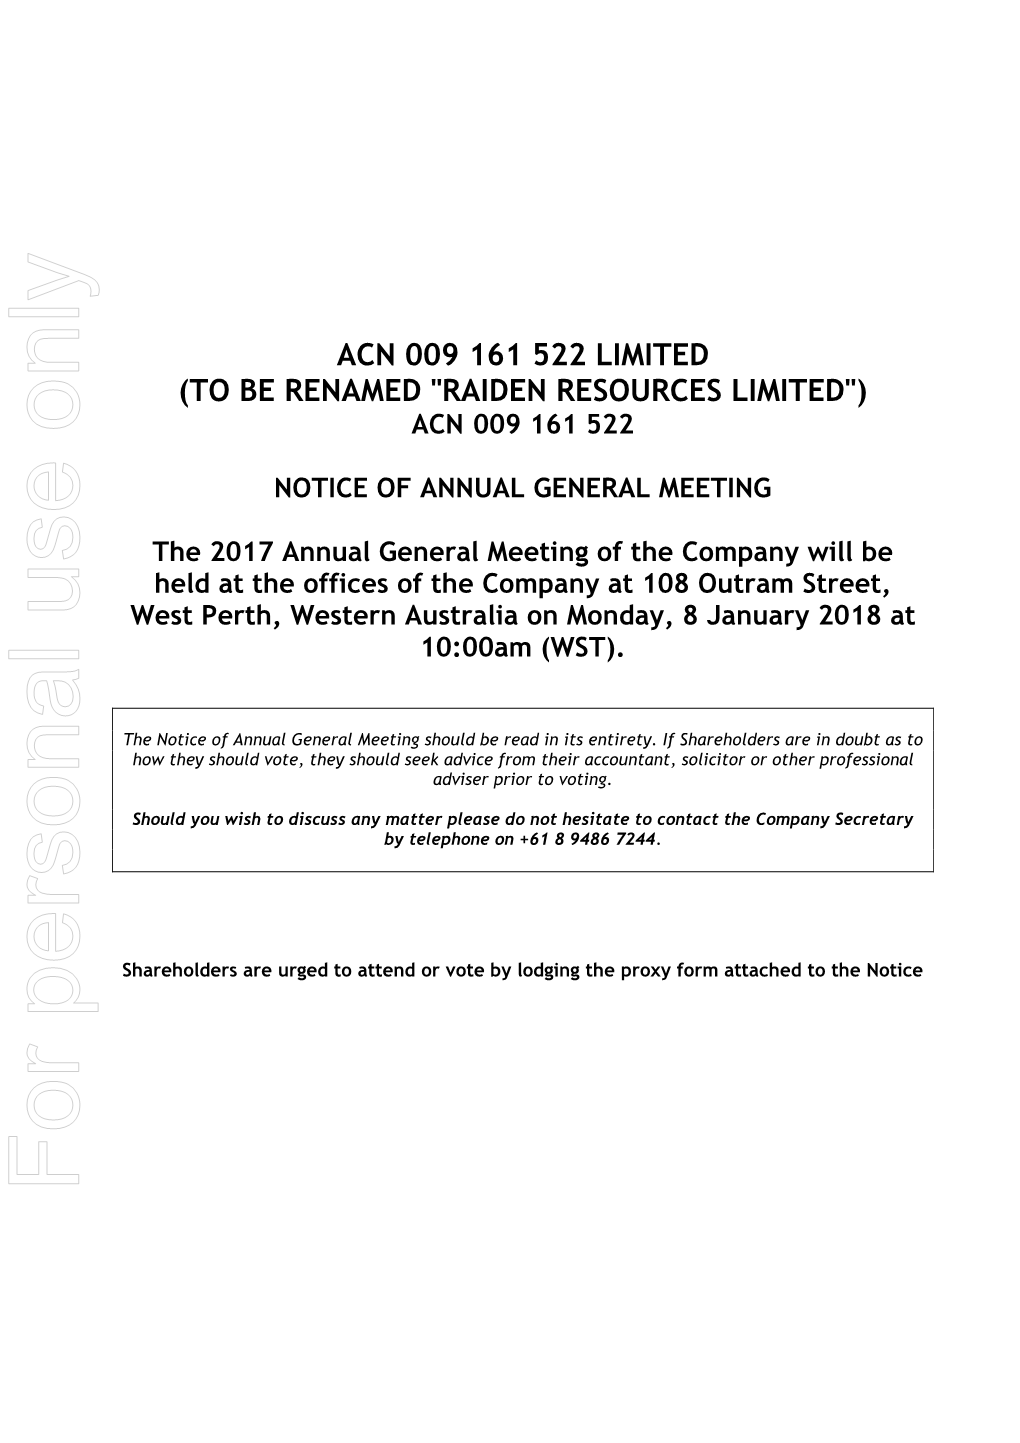 Acn 009 161 522 Limited (To Be Renamed "Raiden Resources Limited") Acn 009 161 522